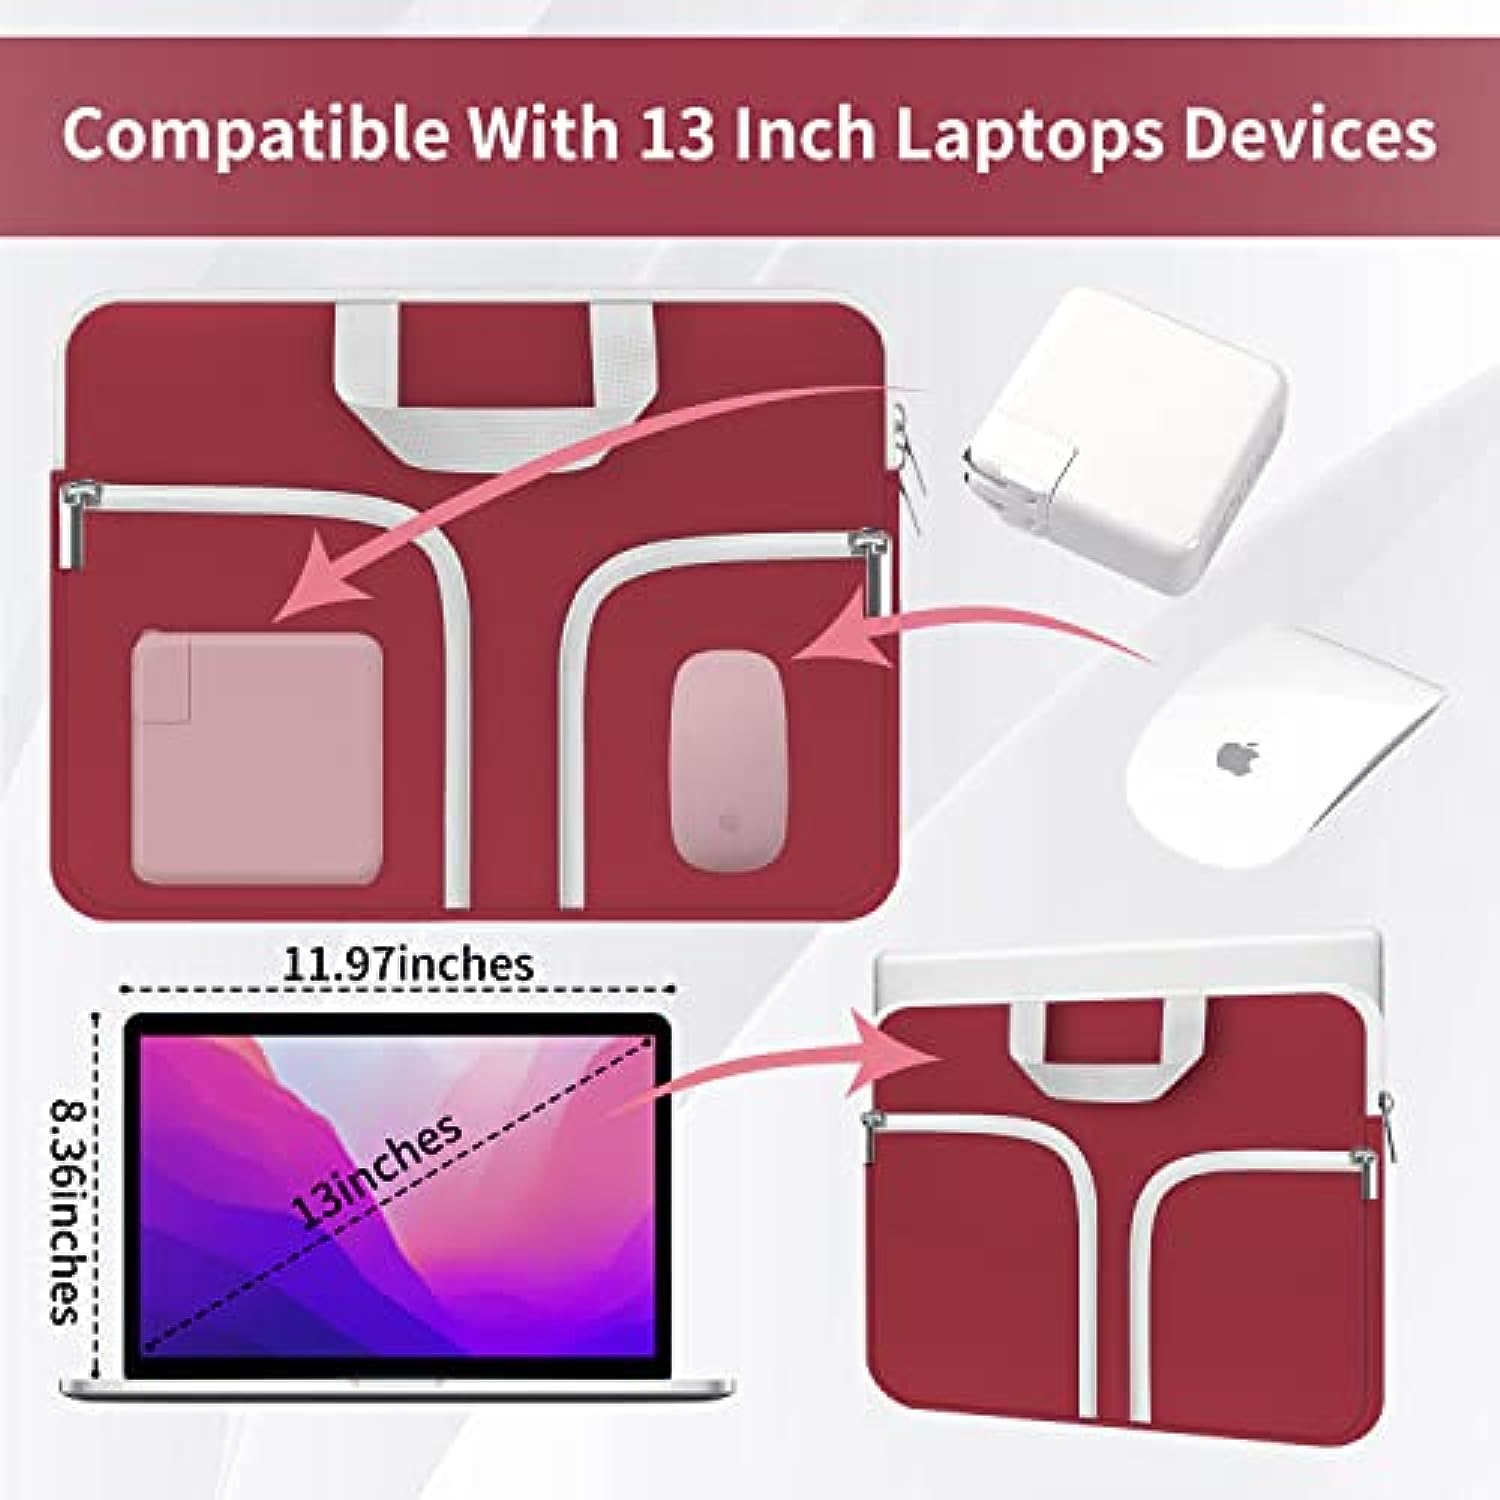 11.6-12.3 inch Neoprene Laptop Case Bag Handle Compatible with Acer Chromebook r11/HP Stream/Samsung/ASUS C202 L210 / Microsoft Surface Pro 7/3/4/5/6/Dell